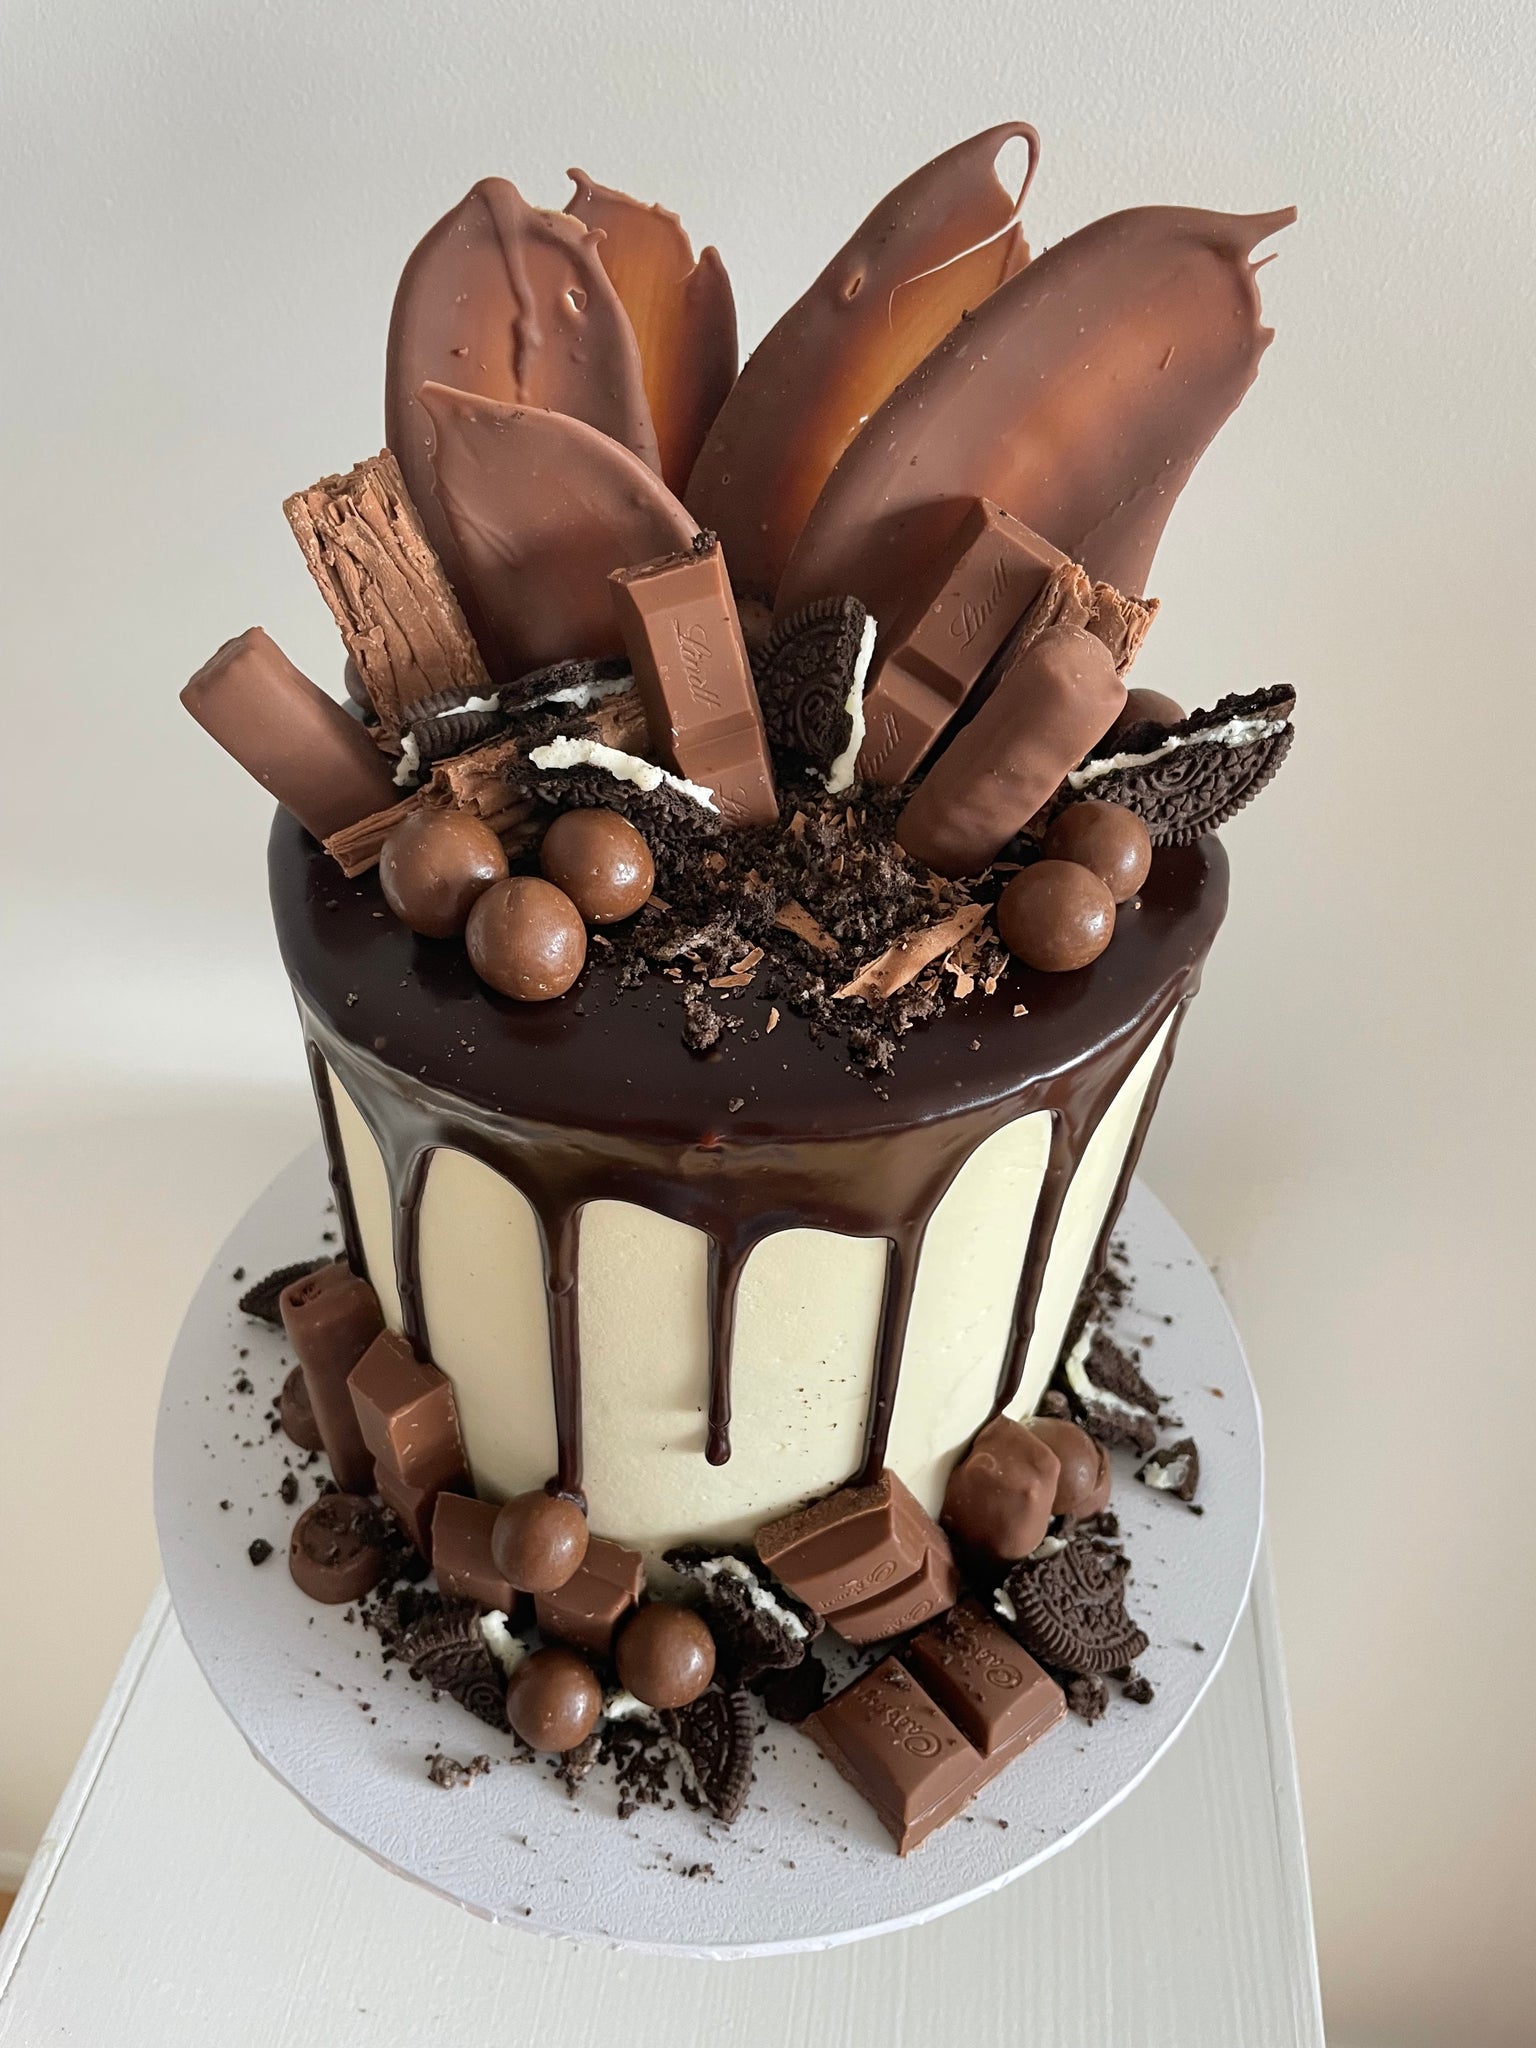 How To Decorate A Chocolate Overload Cake